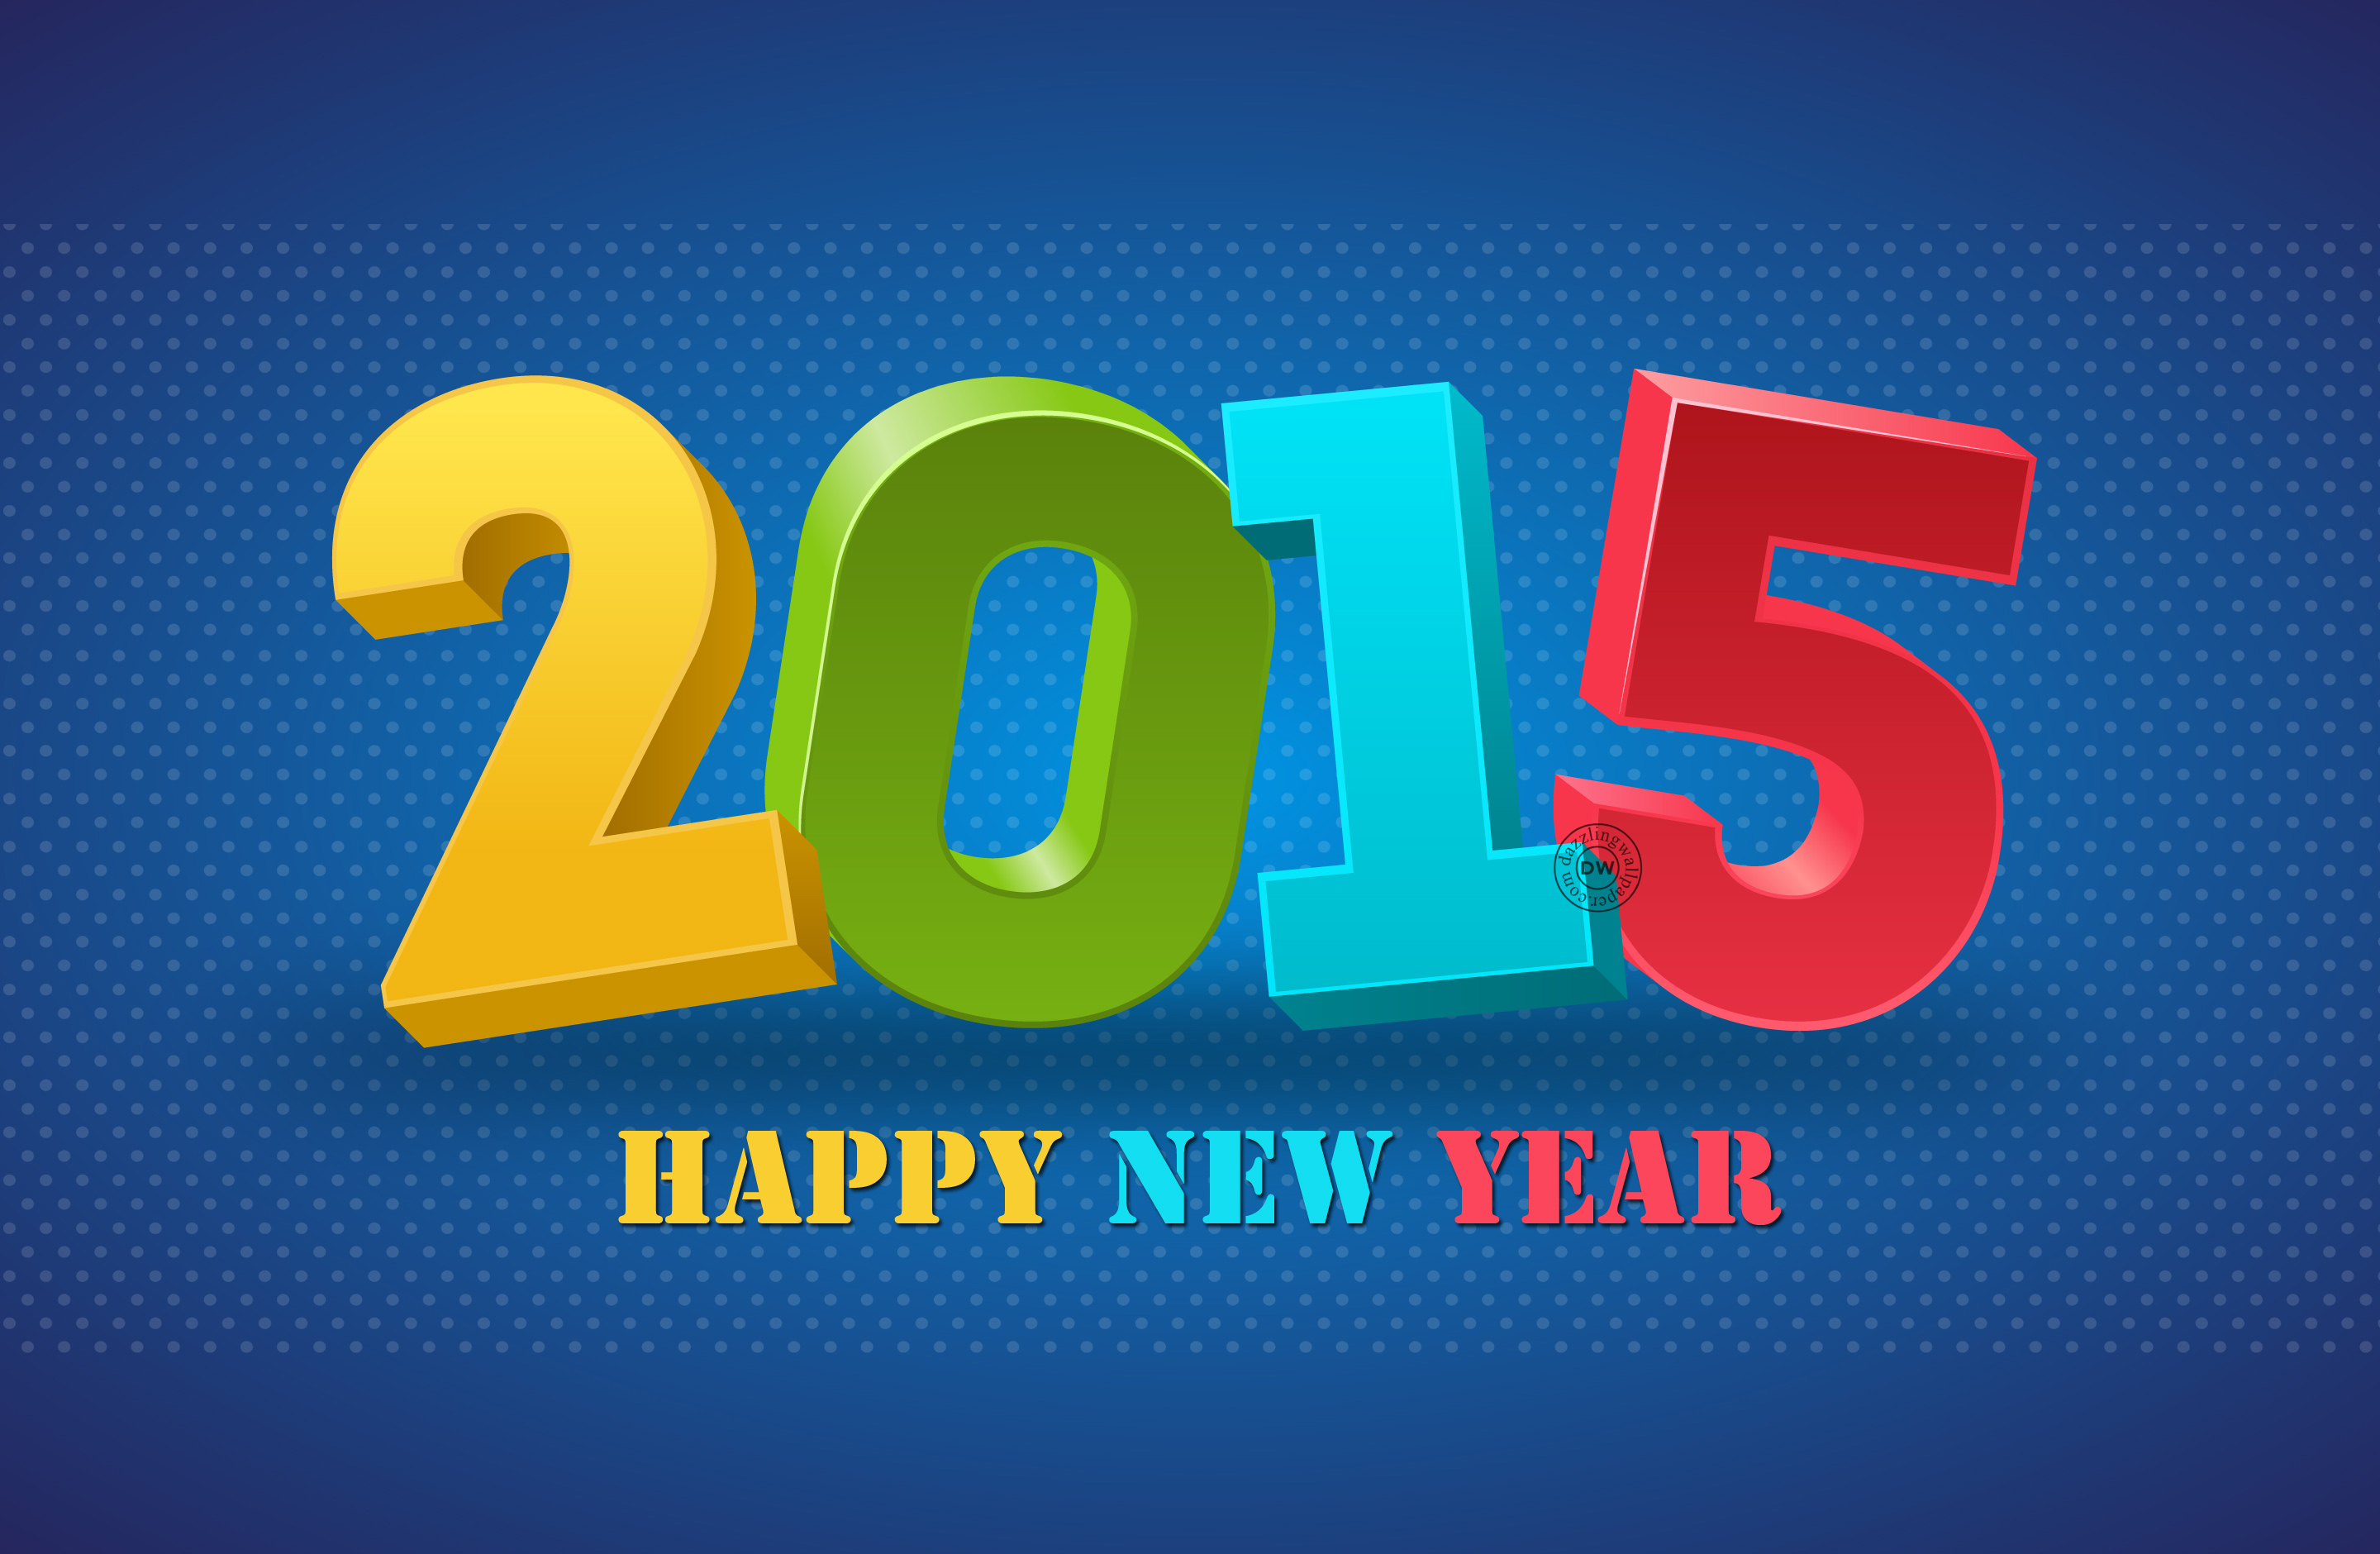 Blue Happy New Year Wallpaper HD Picture Ongur